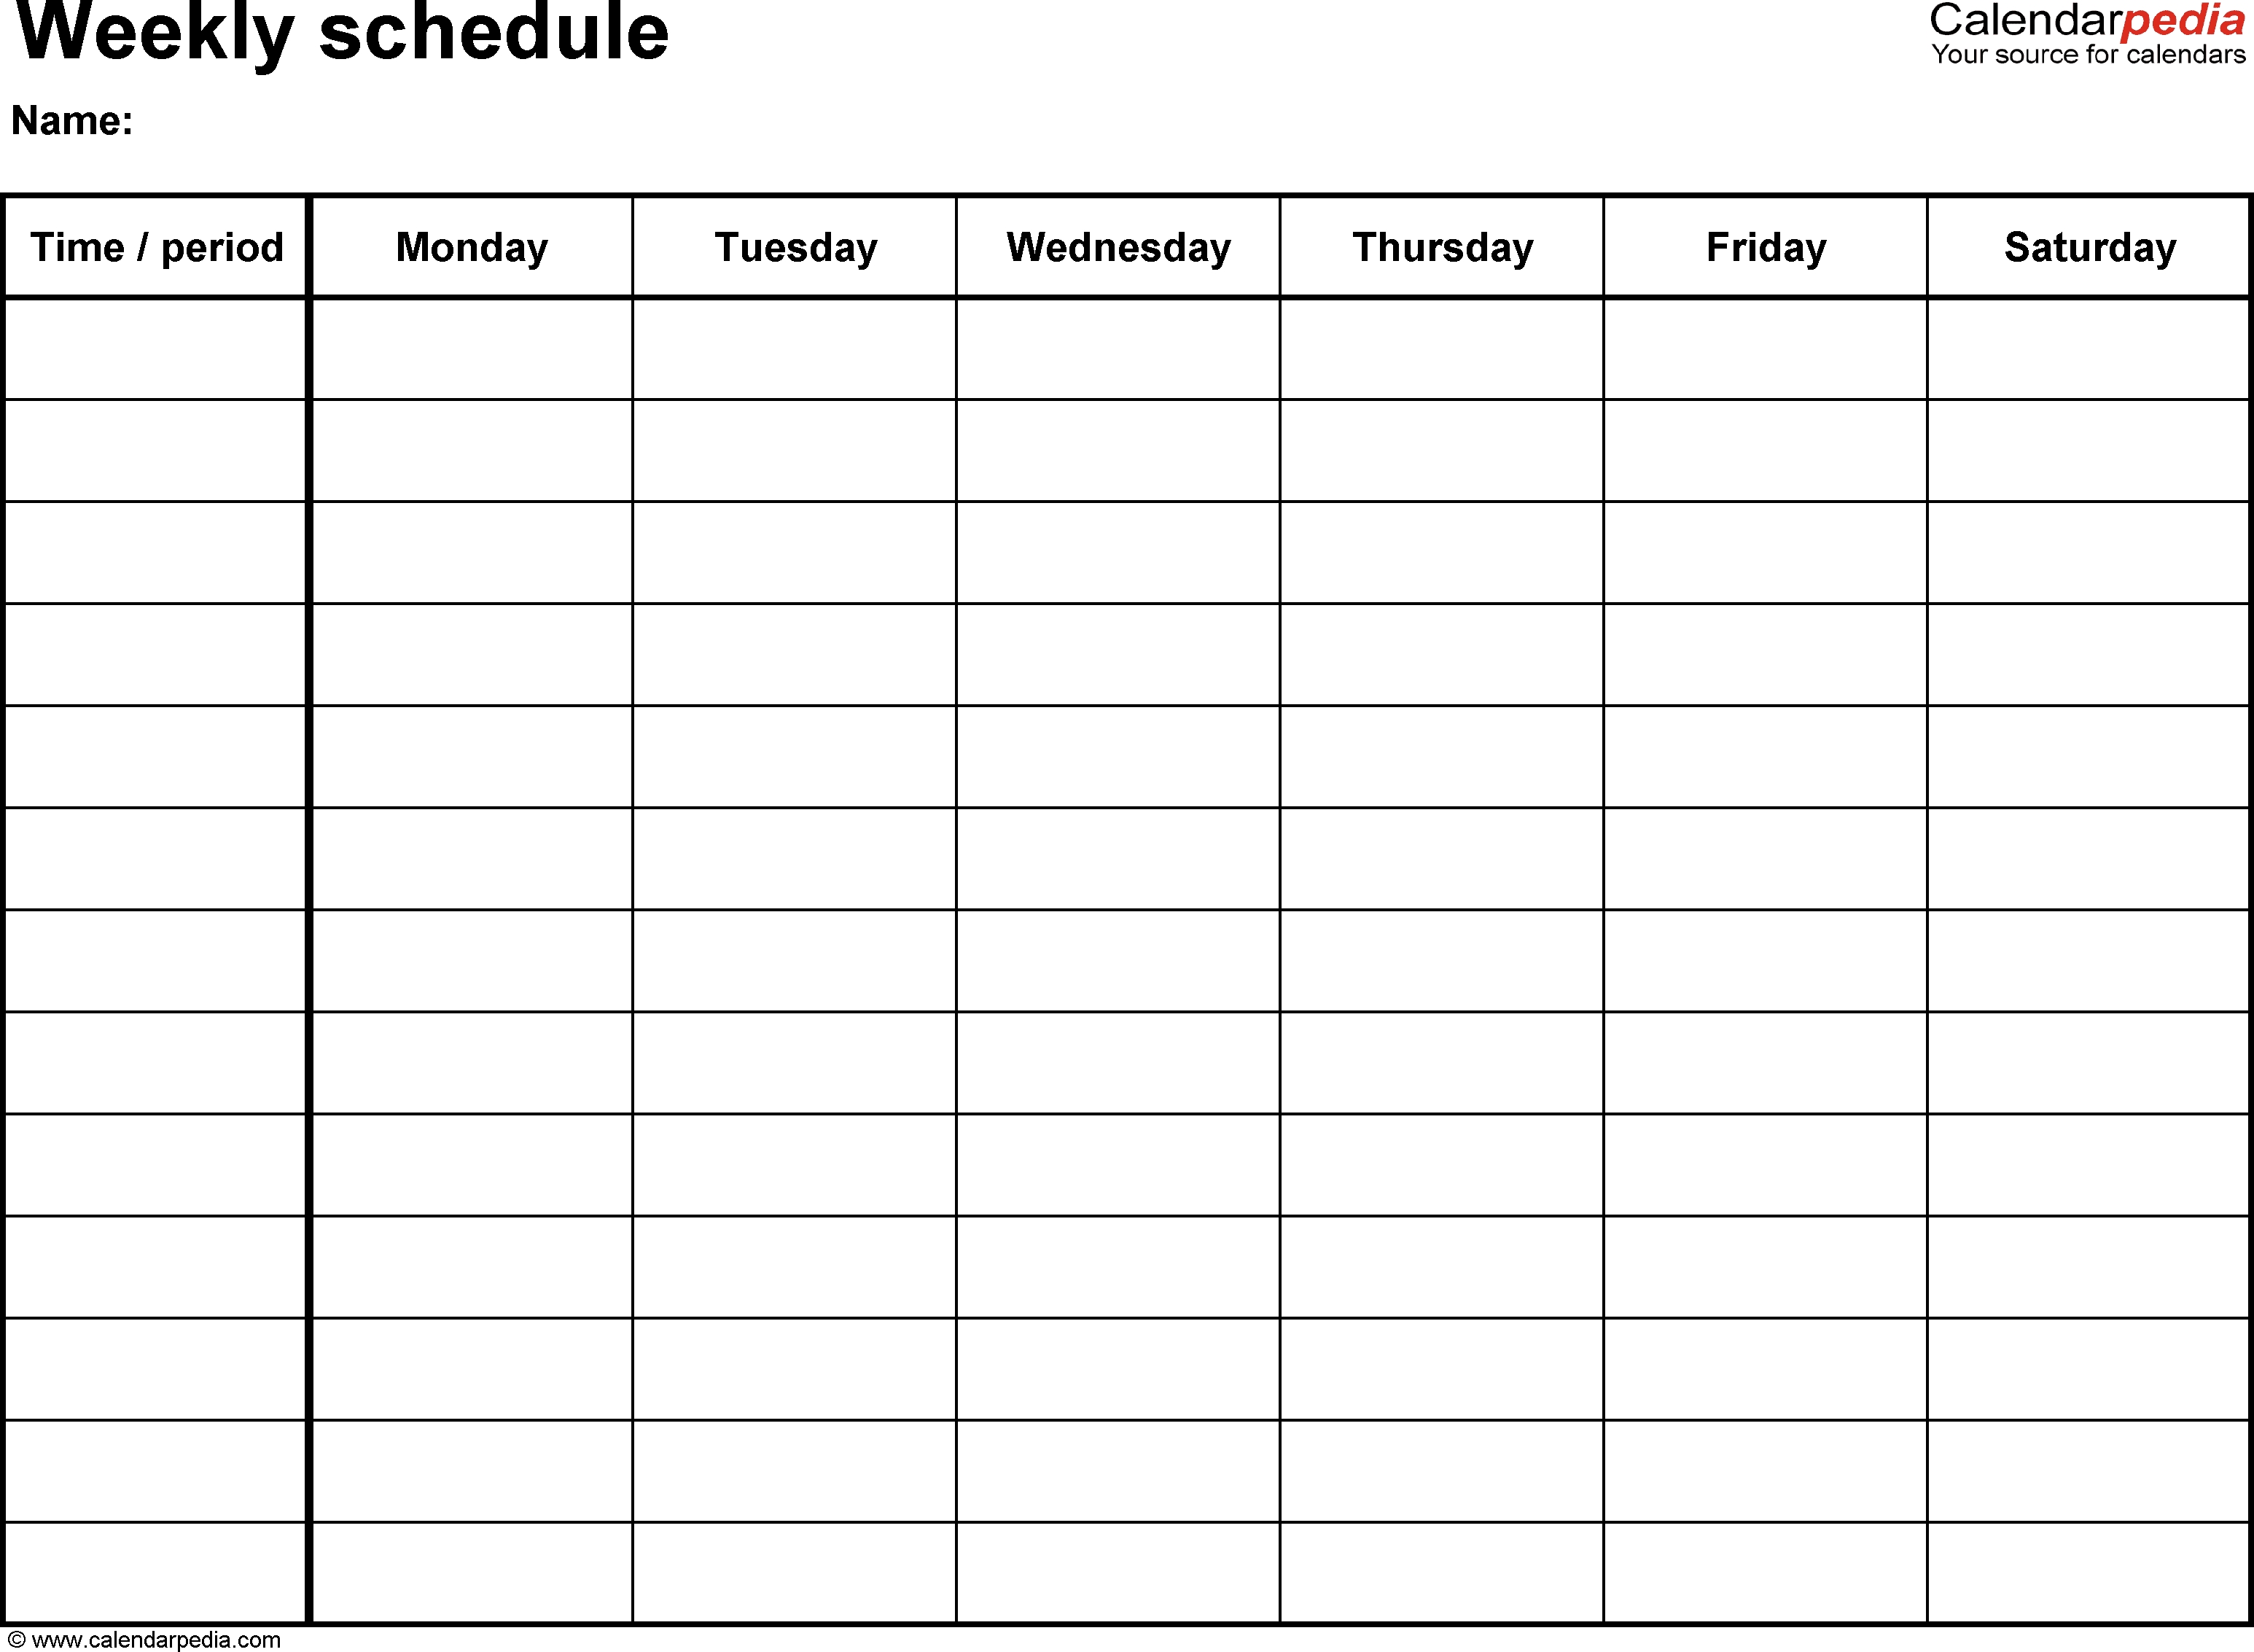 Free Weekly Schedule Templates For Word - 18 Templates  Monday Through Friday Daily Planner